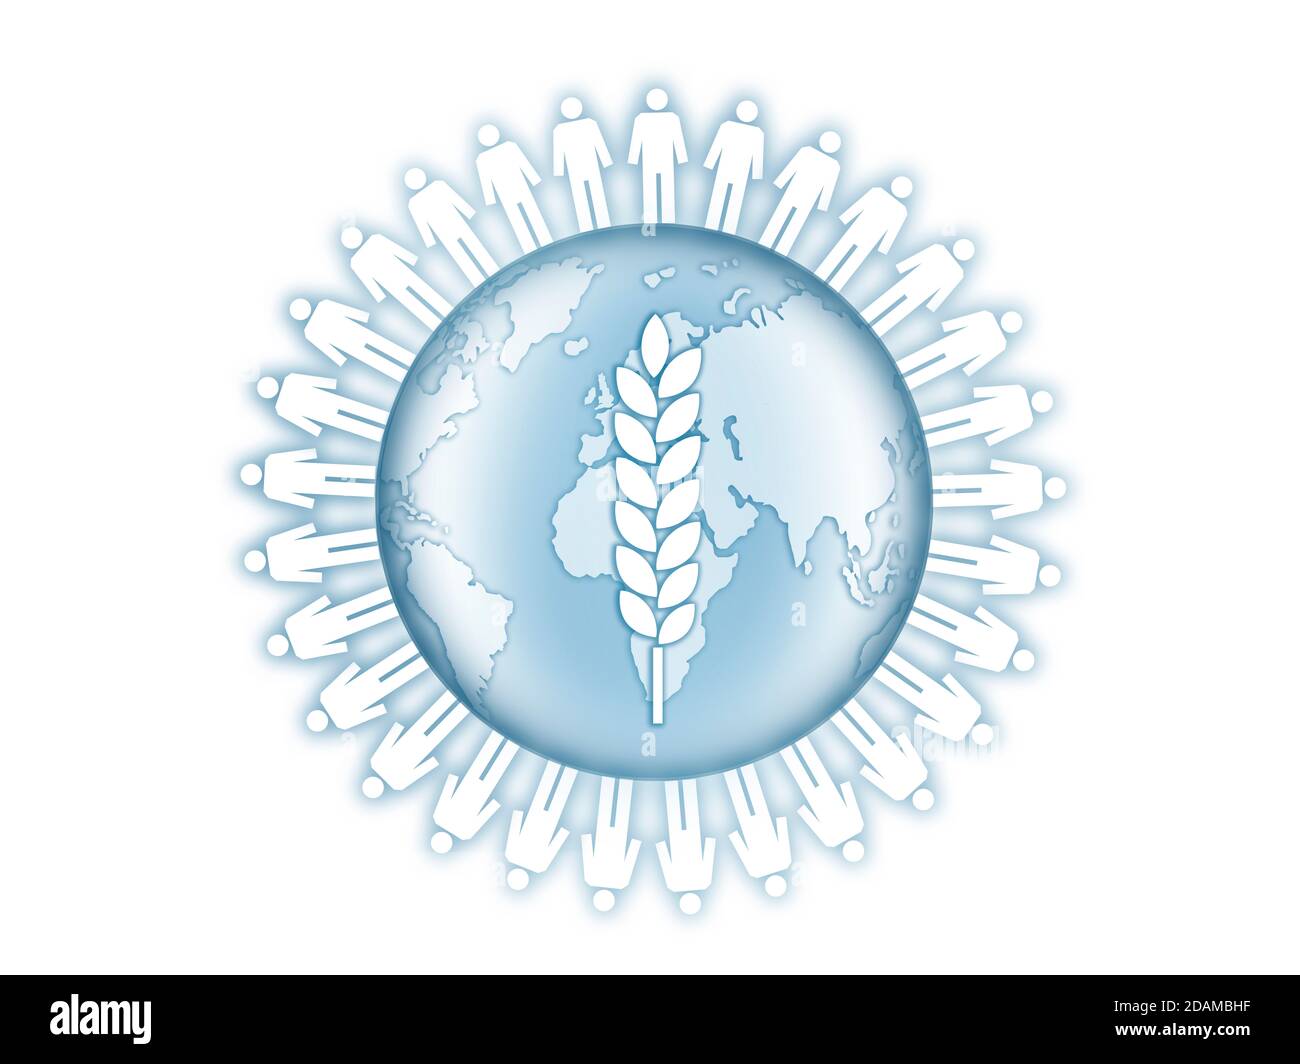 Earth surrounded by people with ear of wheat, illustration. Stock Photo